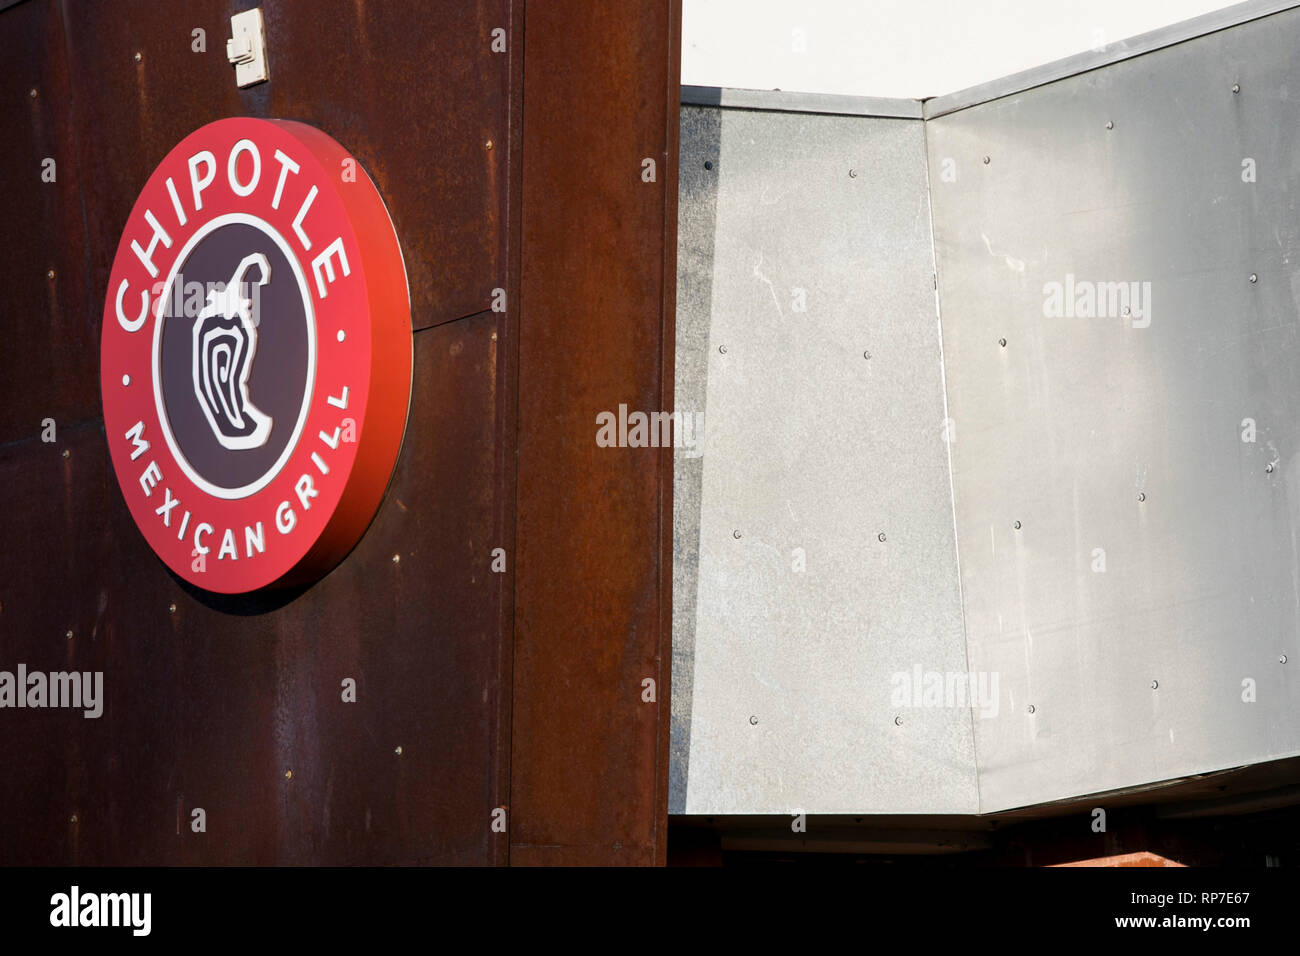 A logo sign outside of a Chipotle restaurant location in Fredericksburg, Virginia on February 19, 2019. Stock Photo